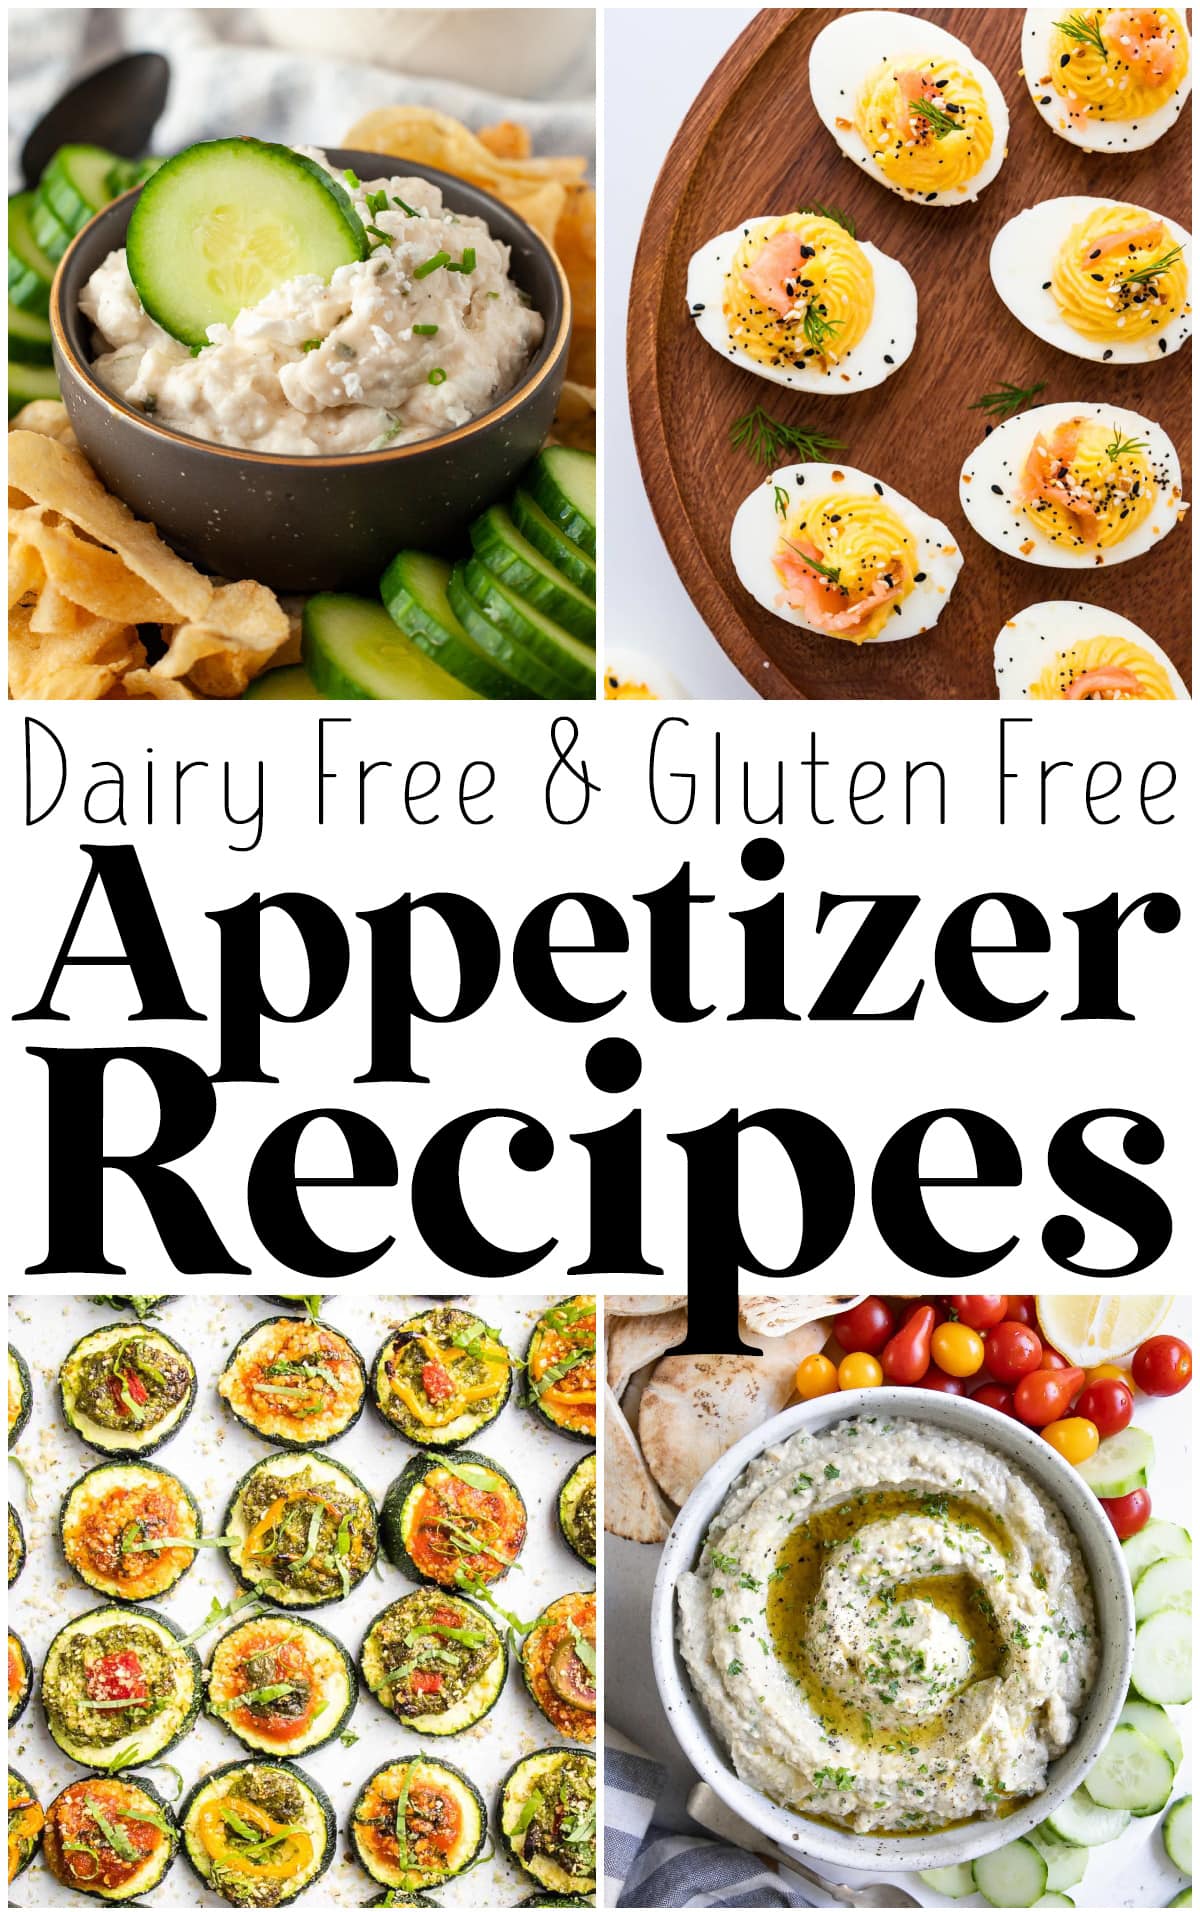 Photo collage showing appetizer recipes that are gluten free.